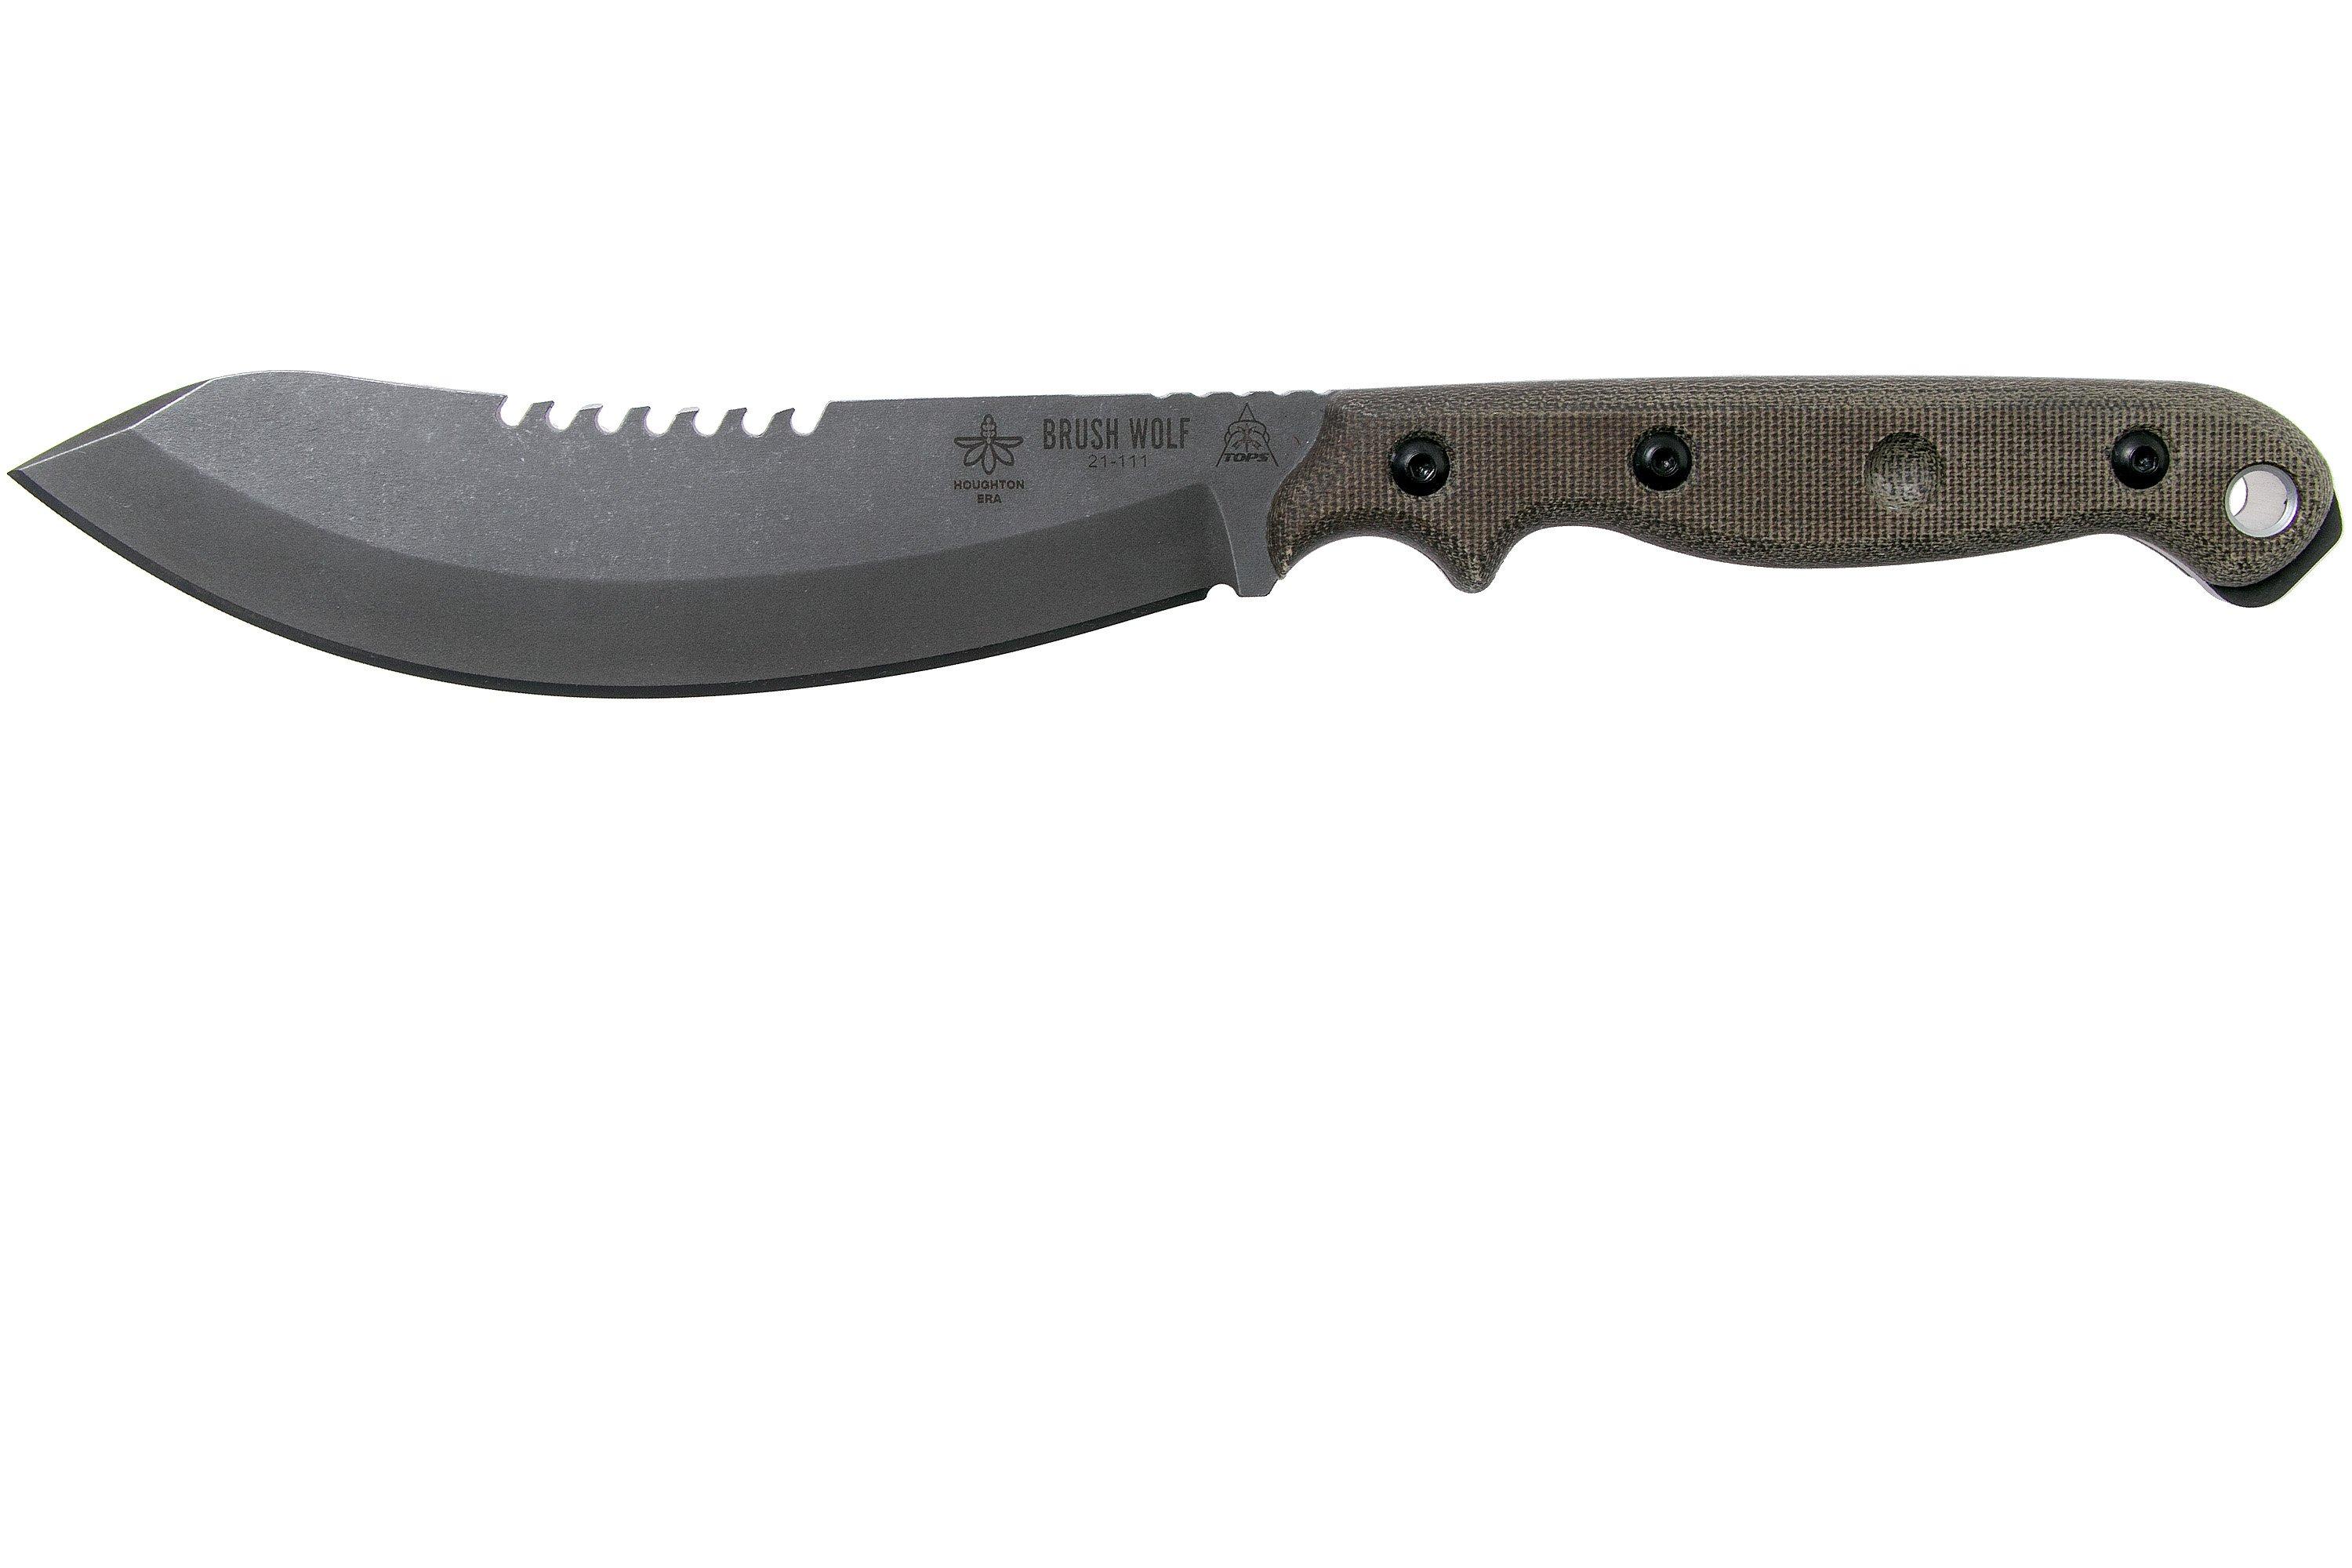 TOPS Knives Brush Wolf BWLF-01 outdoor knife, Nate and Aaron